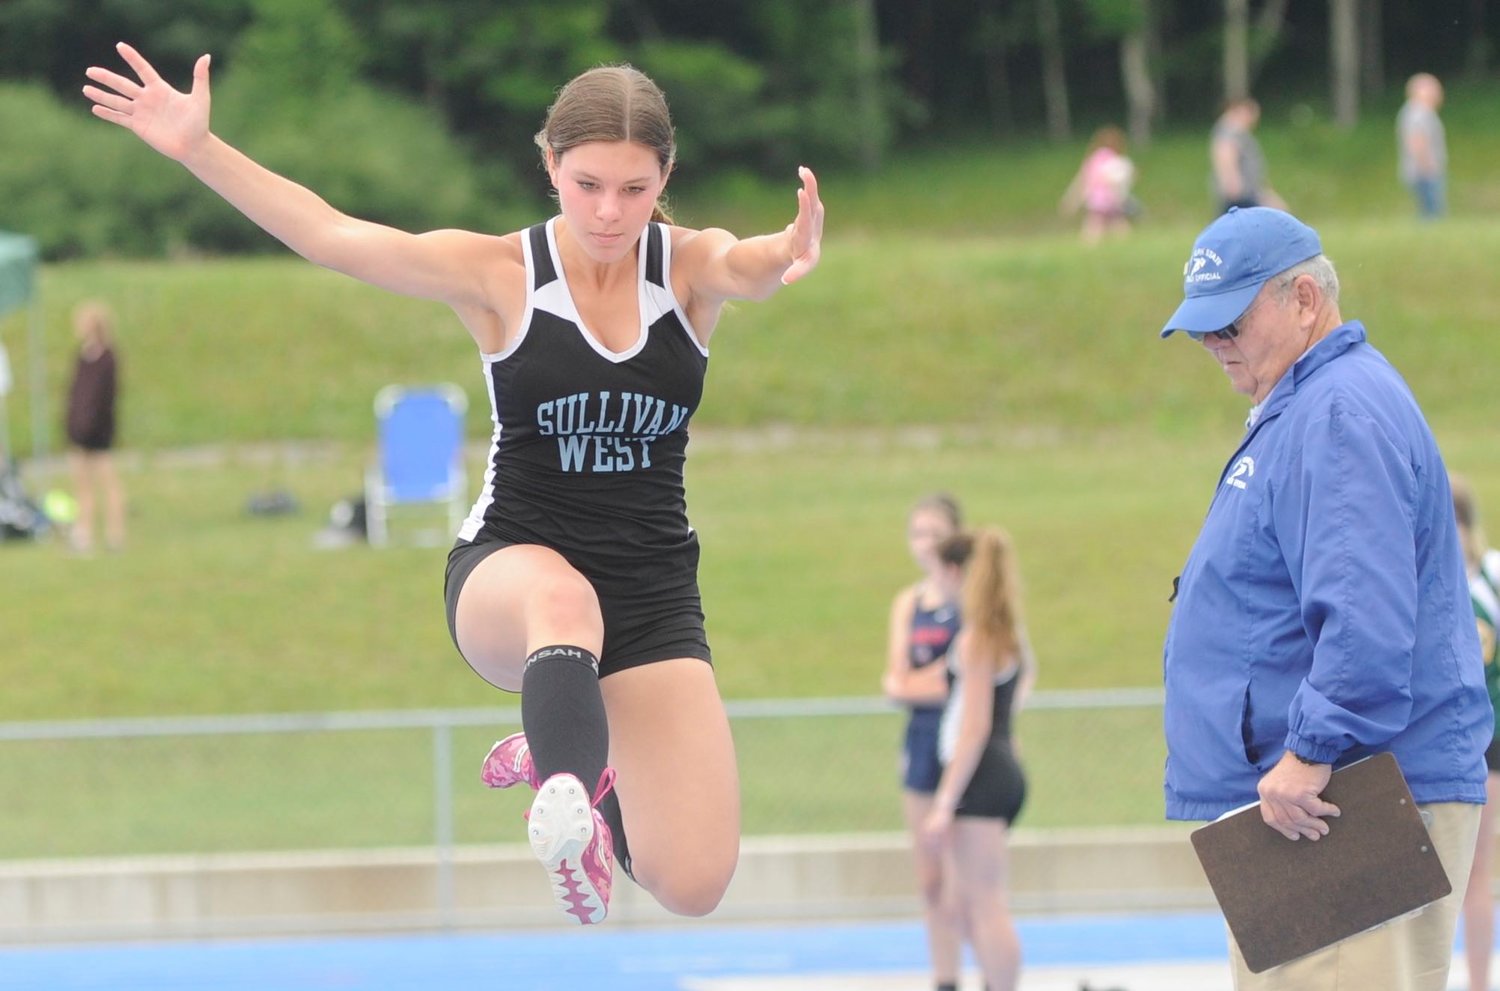 Abby Parucki was chosen as the Most Valuable Player in Girls Varsity Golf in 2021. She is pictured here competing in the long jump at a homestand track and field meet.